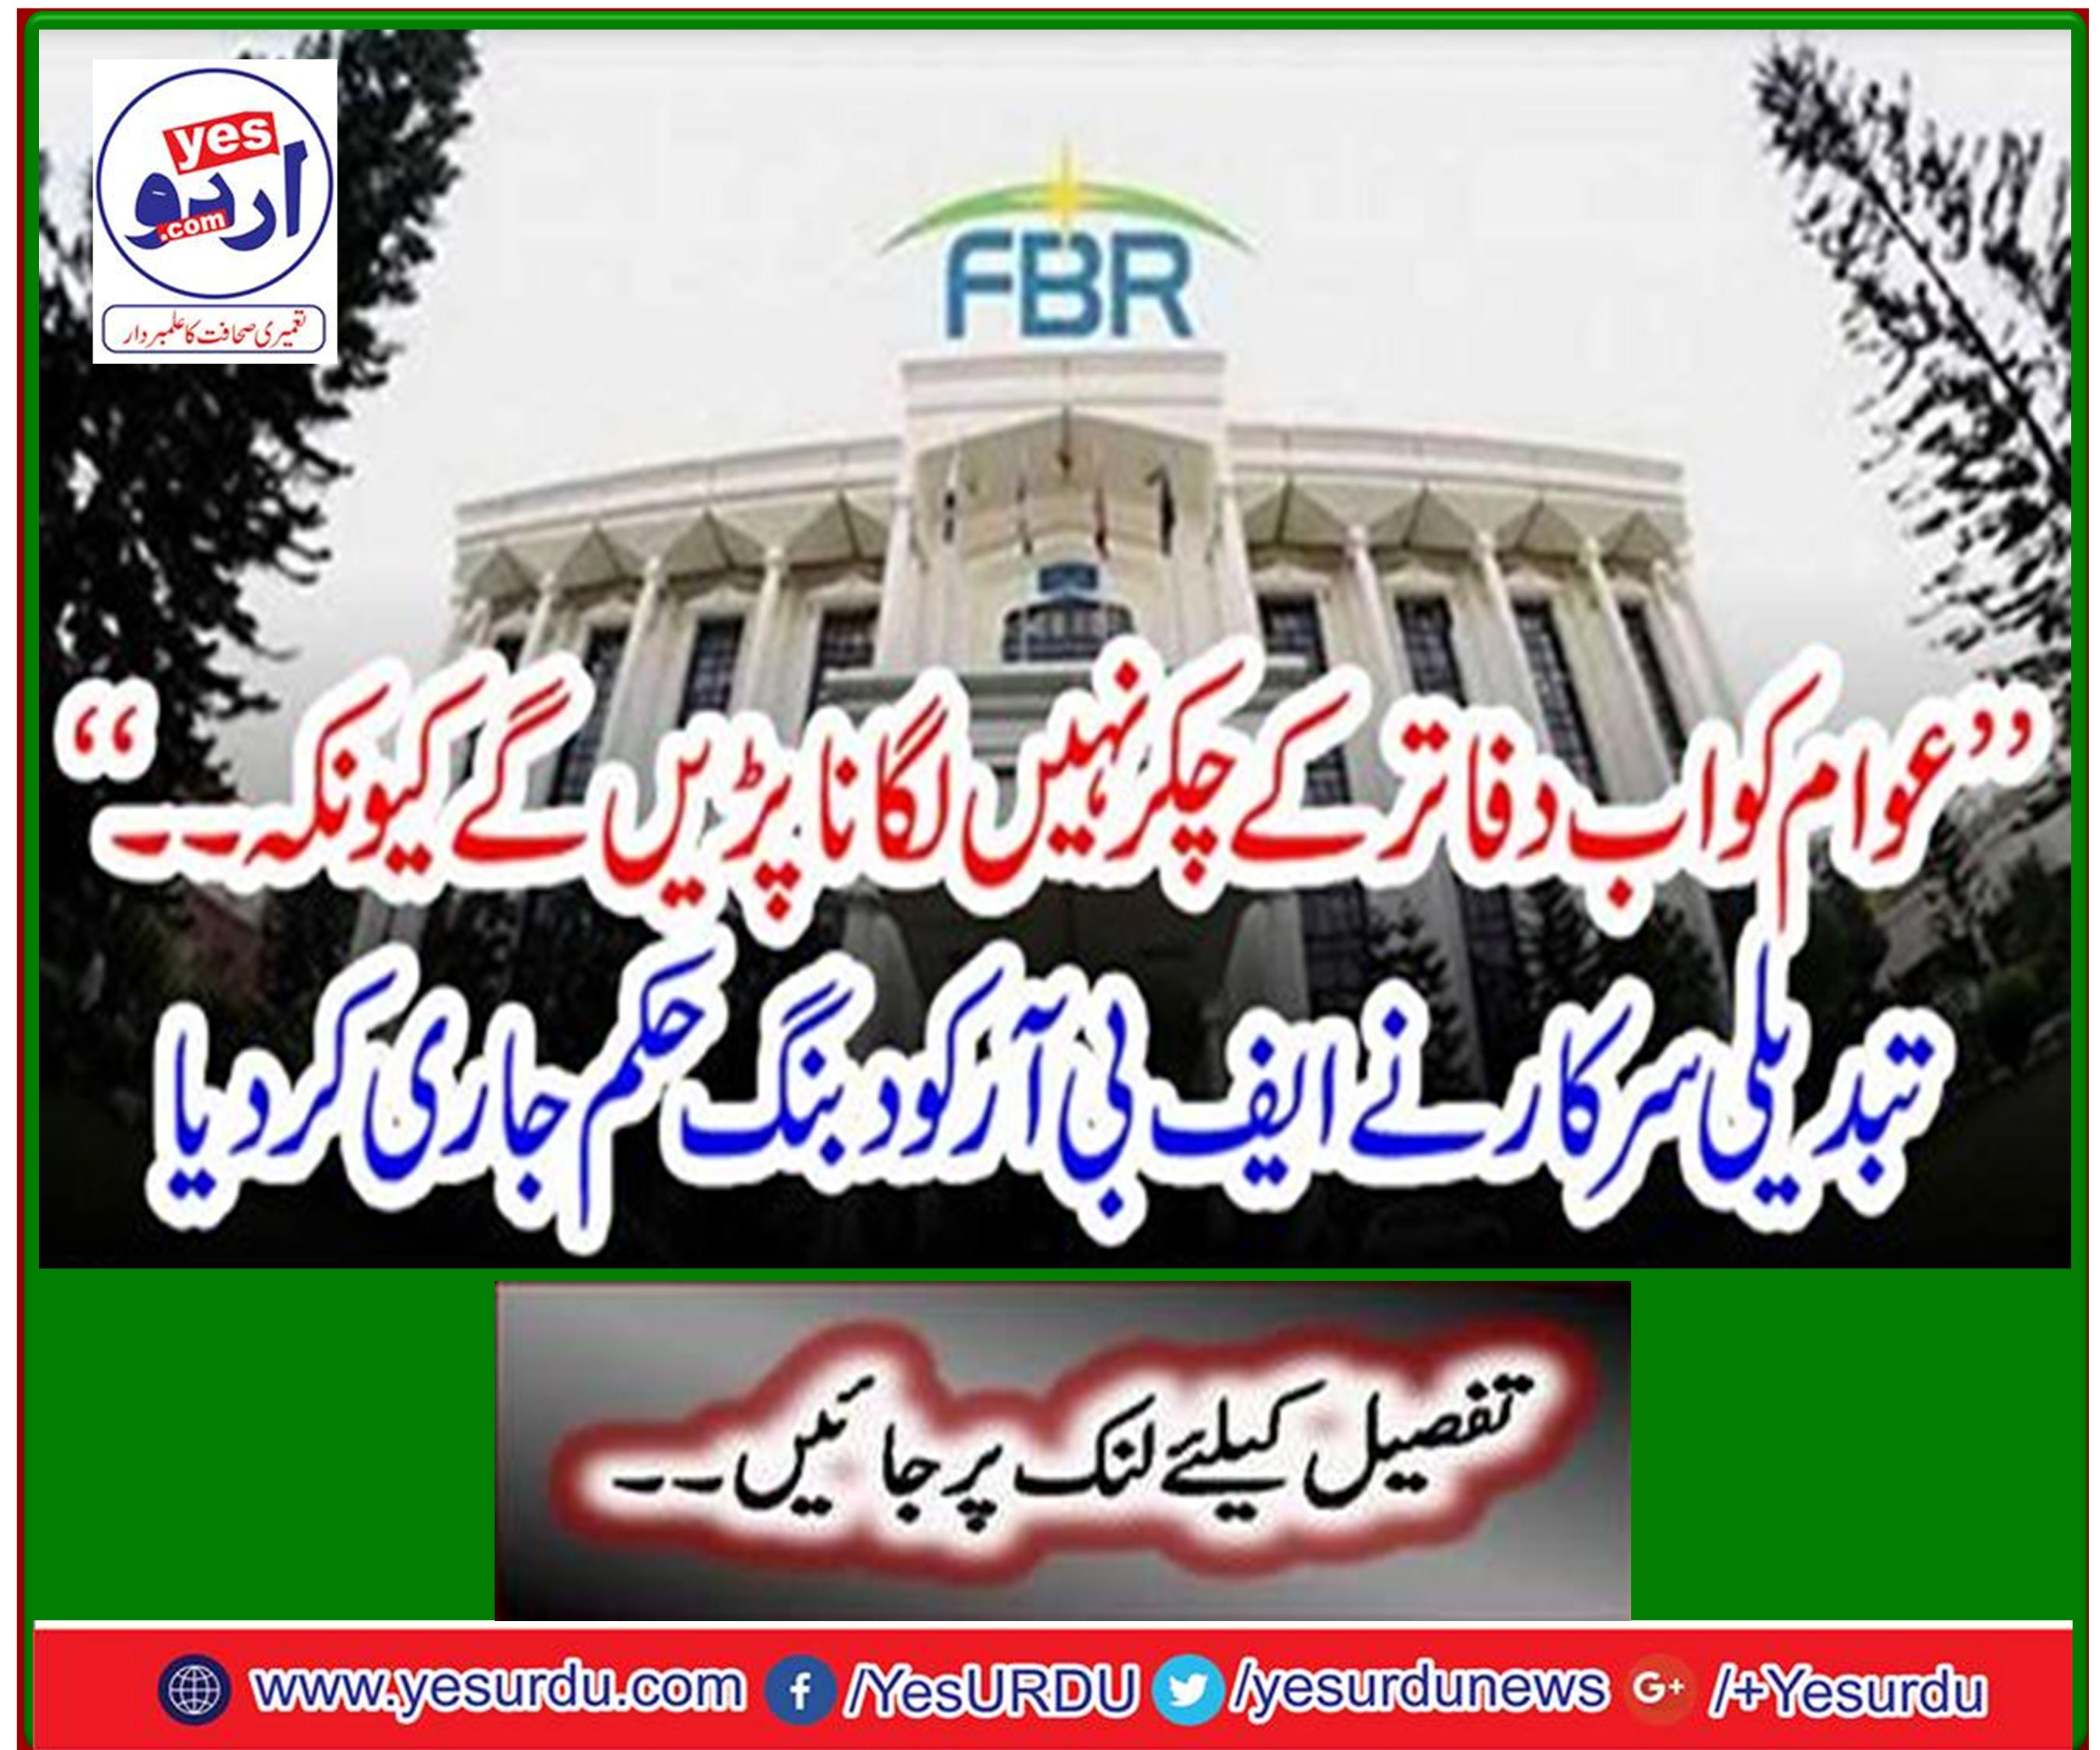 "The public will no longer have to walk around the offices because ..." The change government issued a bullying order to the FBR